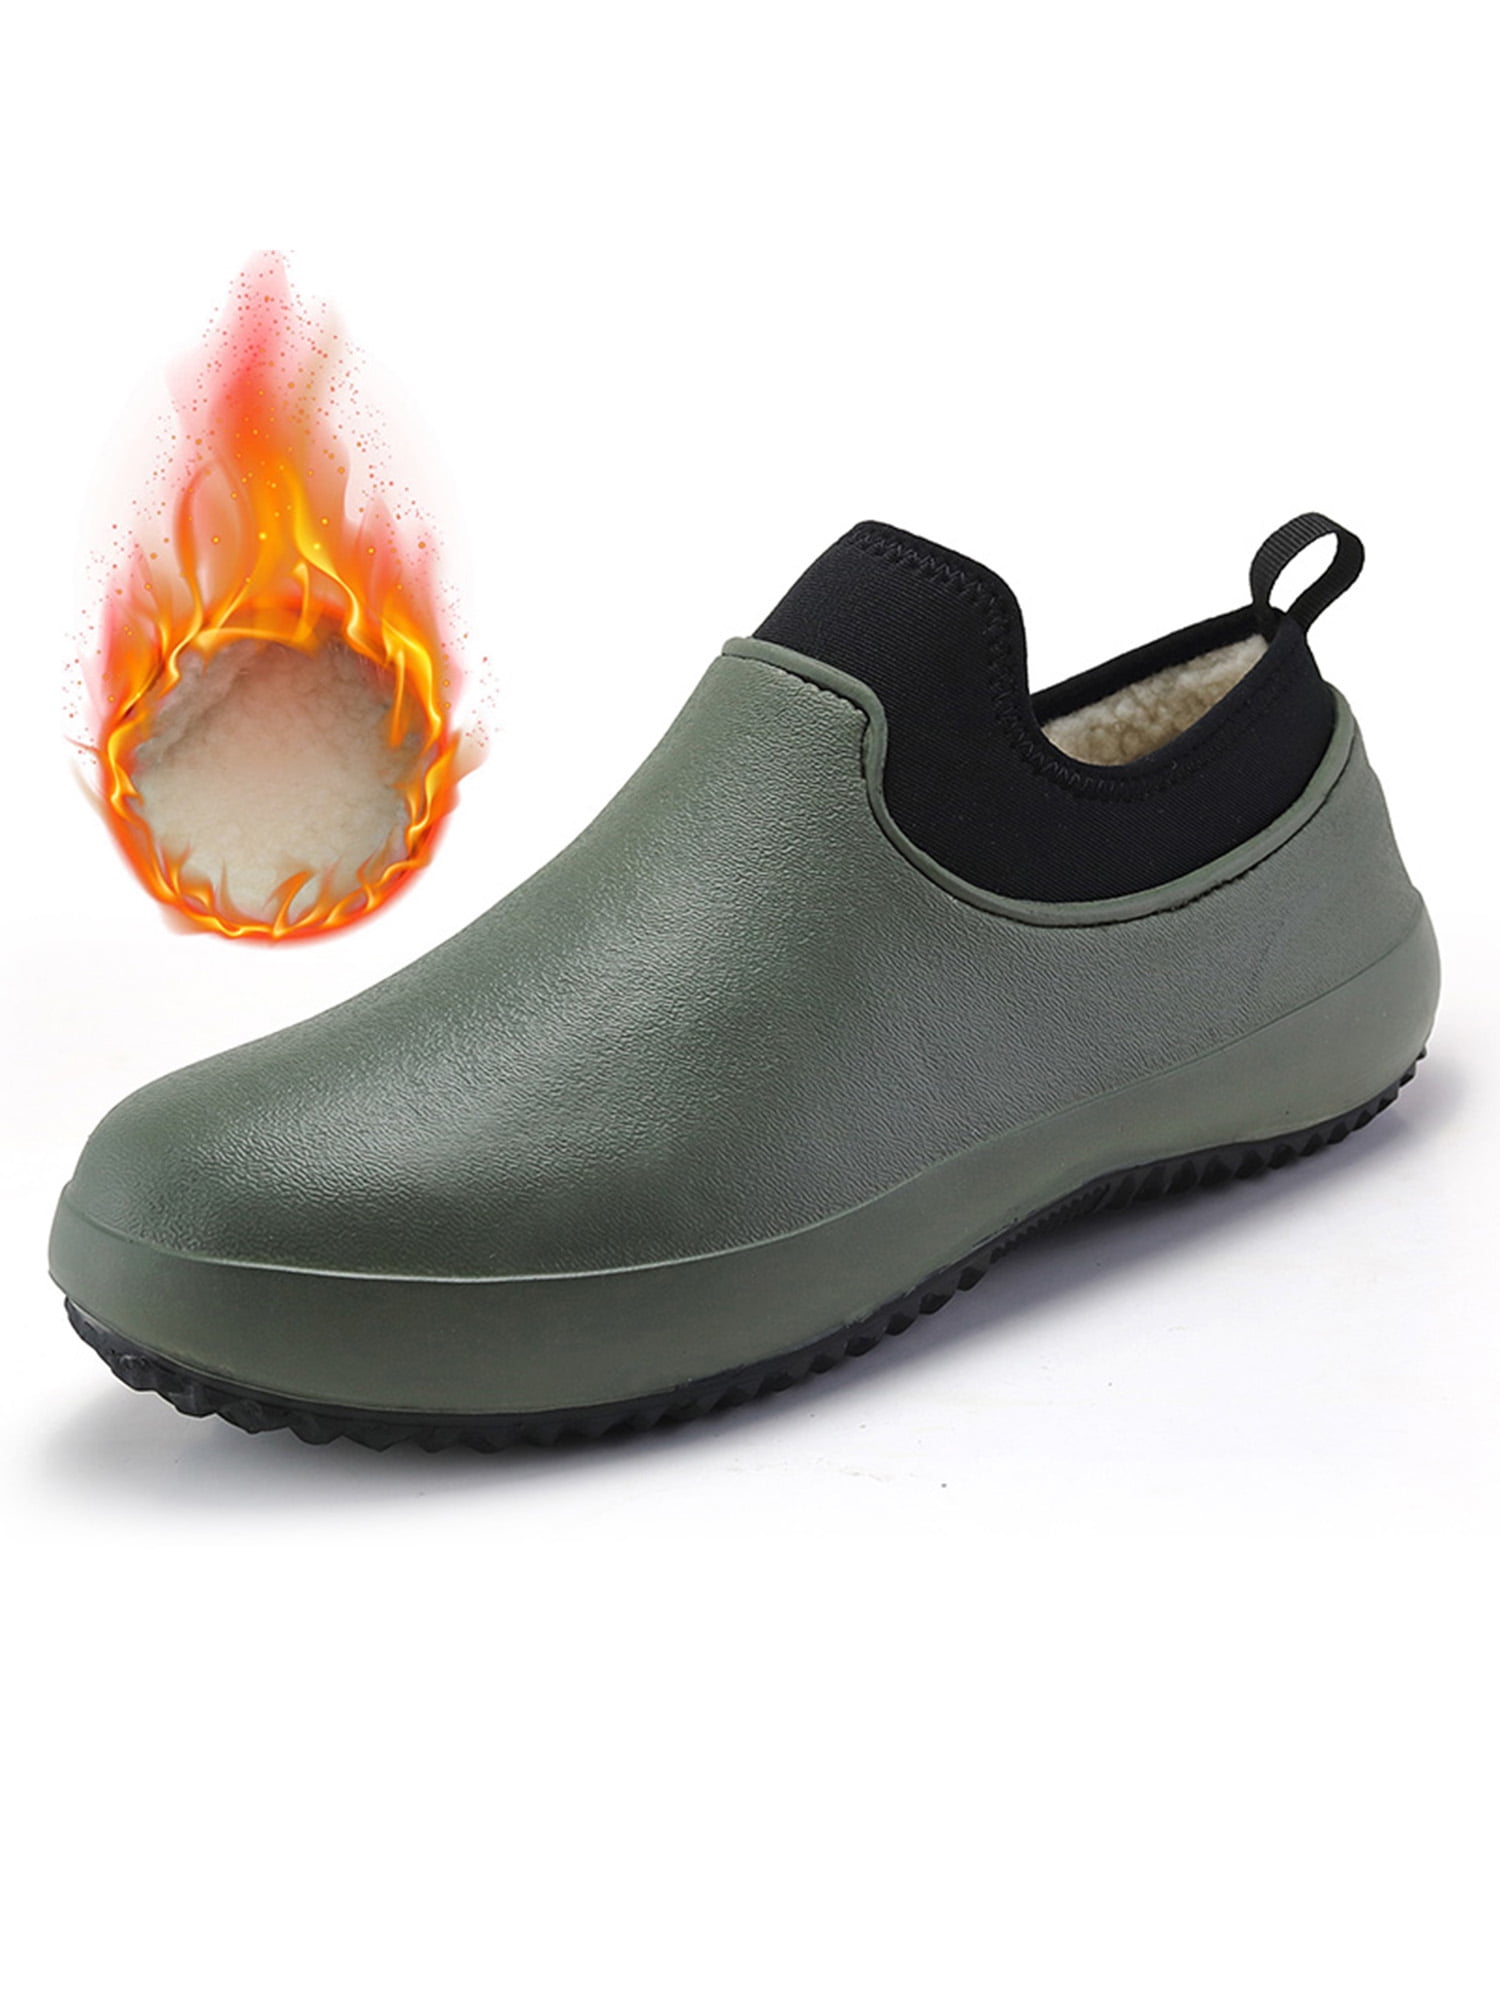 Pro Nurses Food Hygiene Kitchen Catering Work Safety Clogs Shoes Steel Toe Cap 